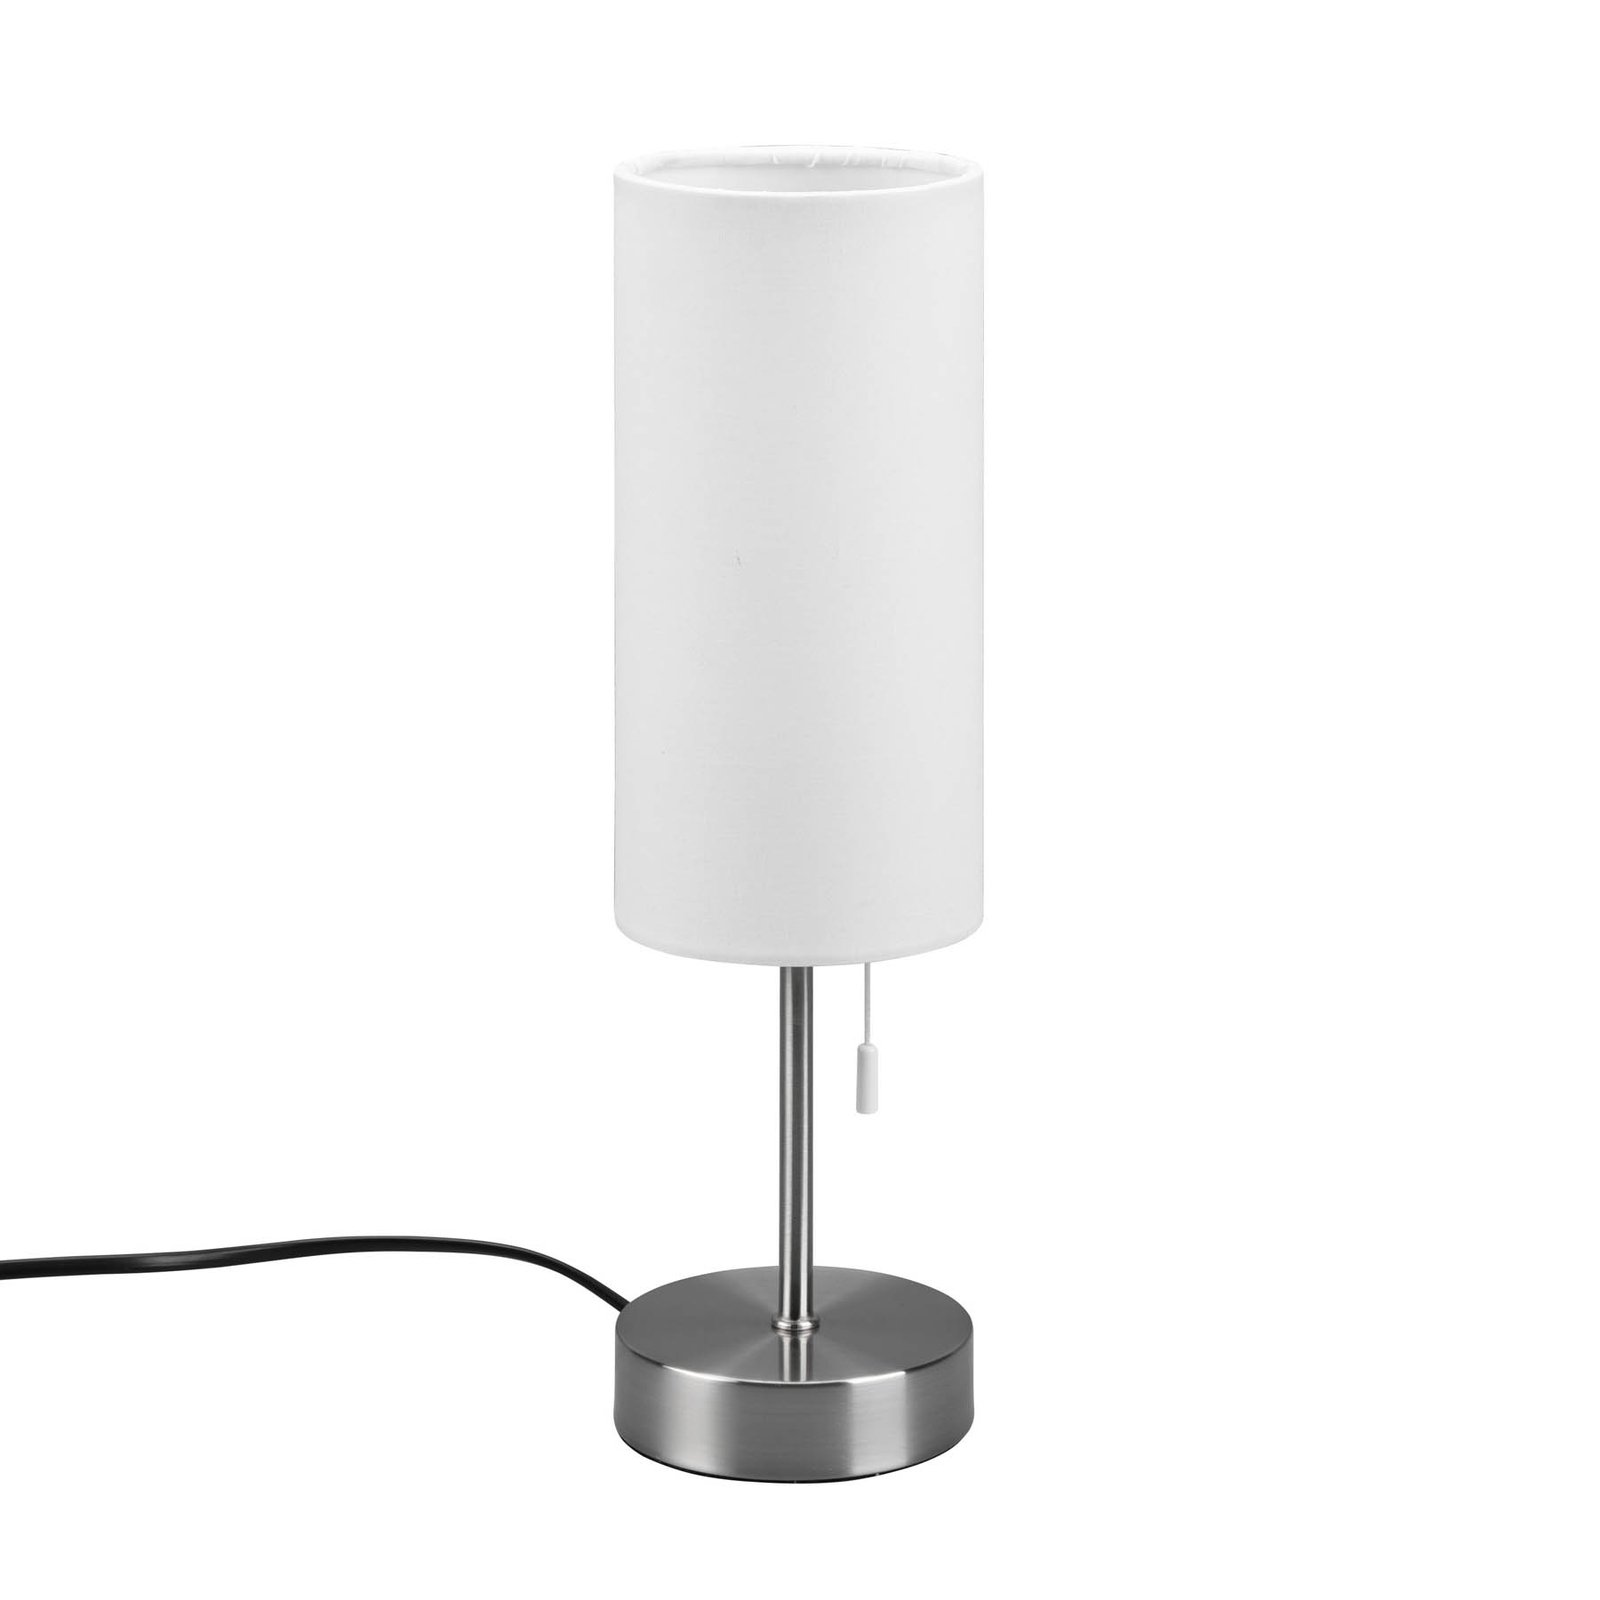 Jaro table lamp with USB port, white/nickel